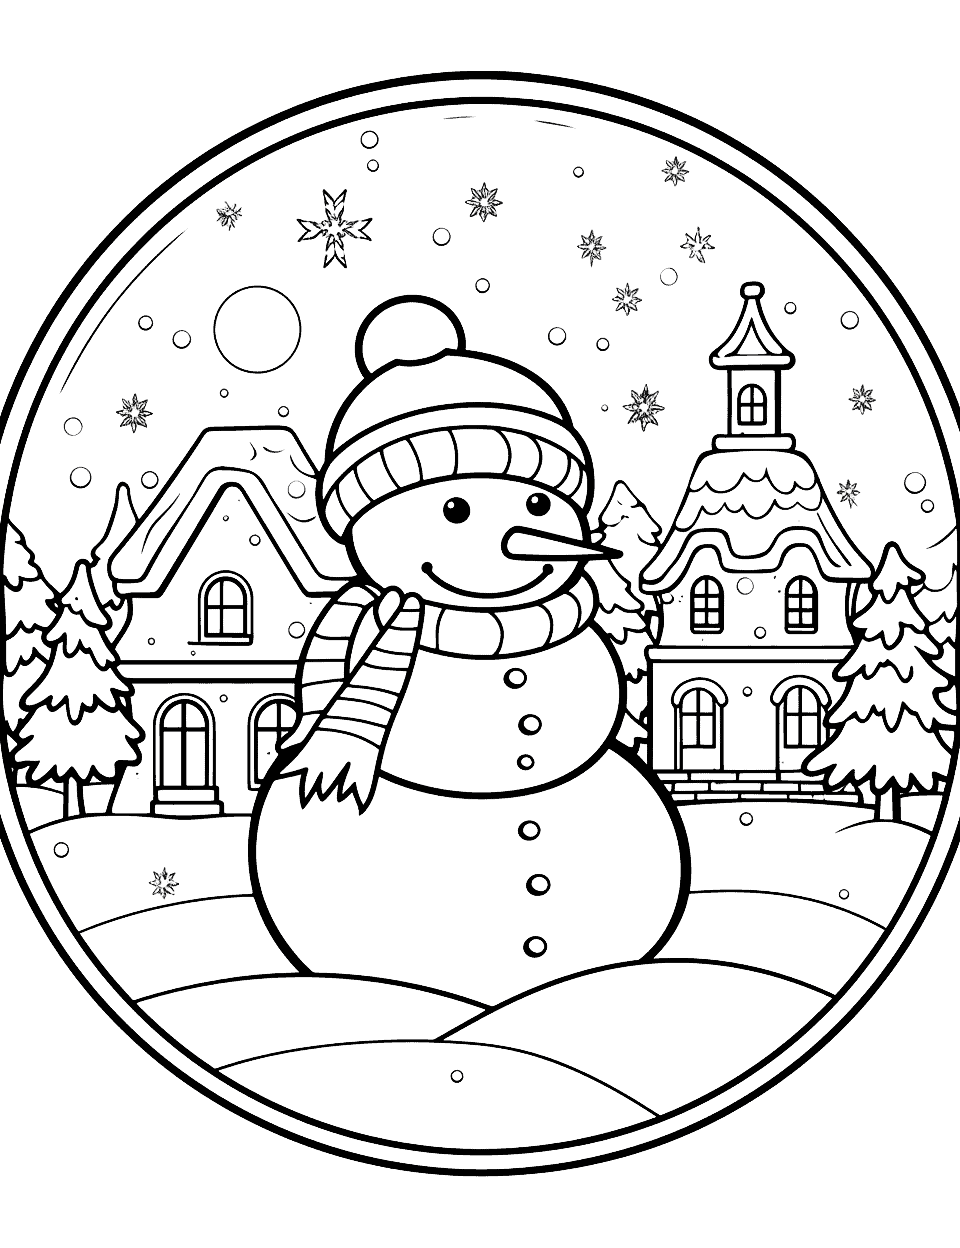 Snow Globe Magic Winter Coloring Page - A beautiful snow globe featuring a miniature snowy village.